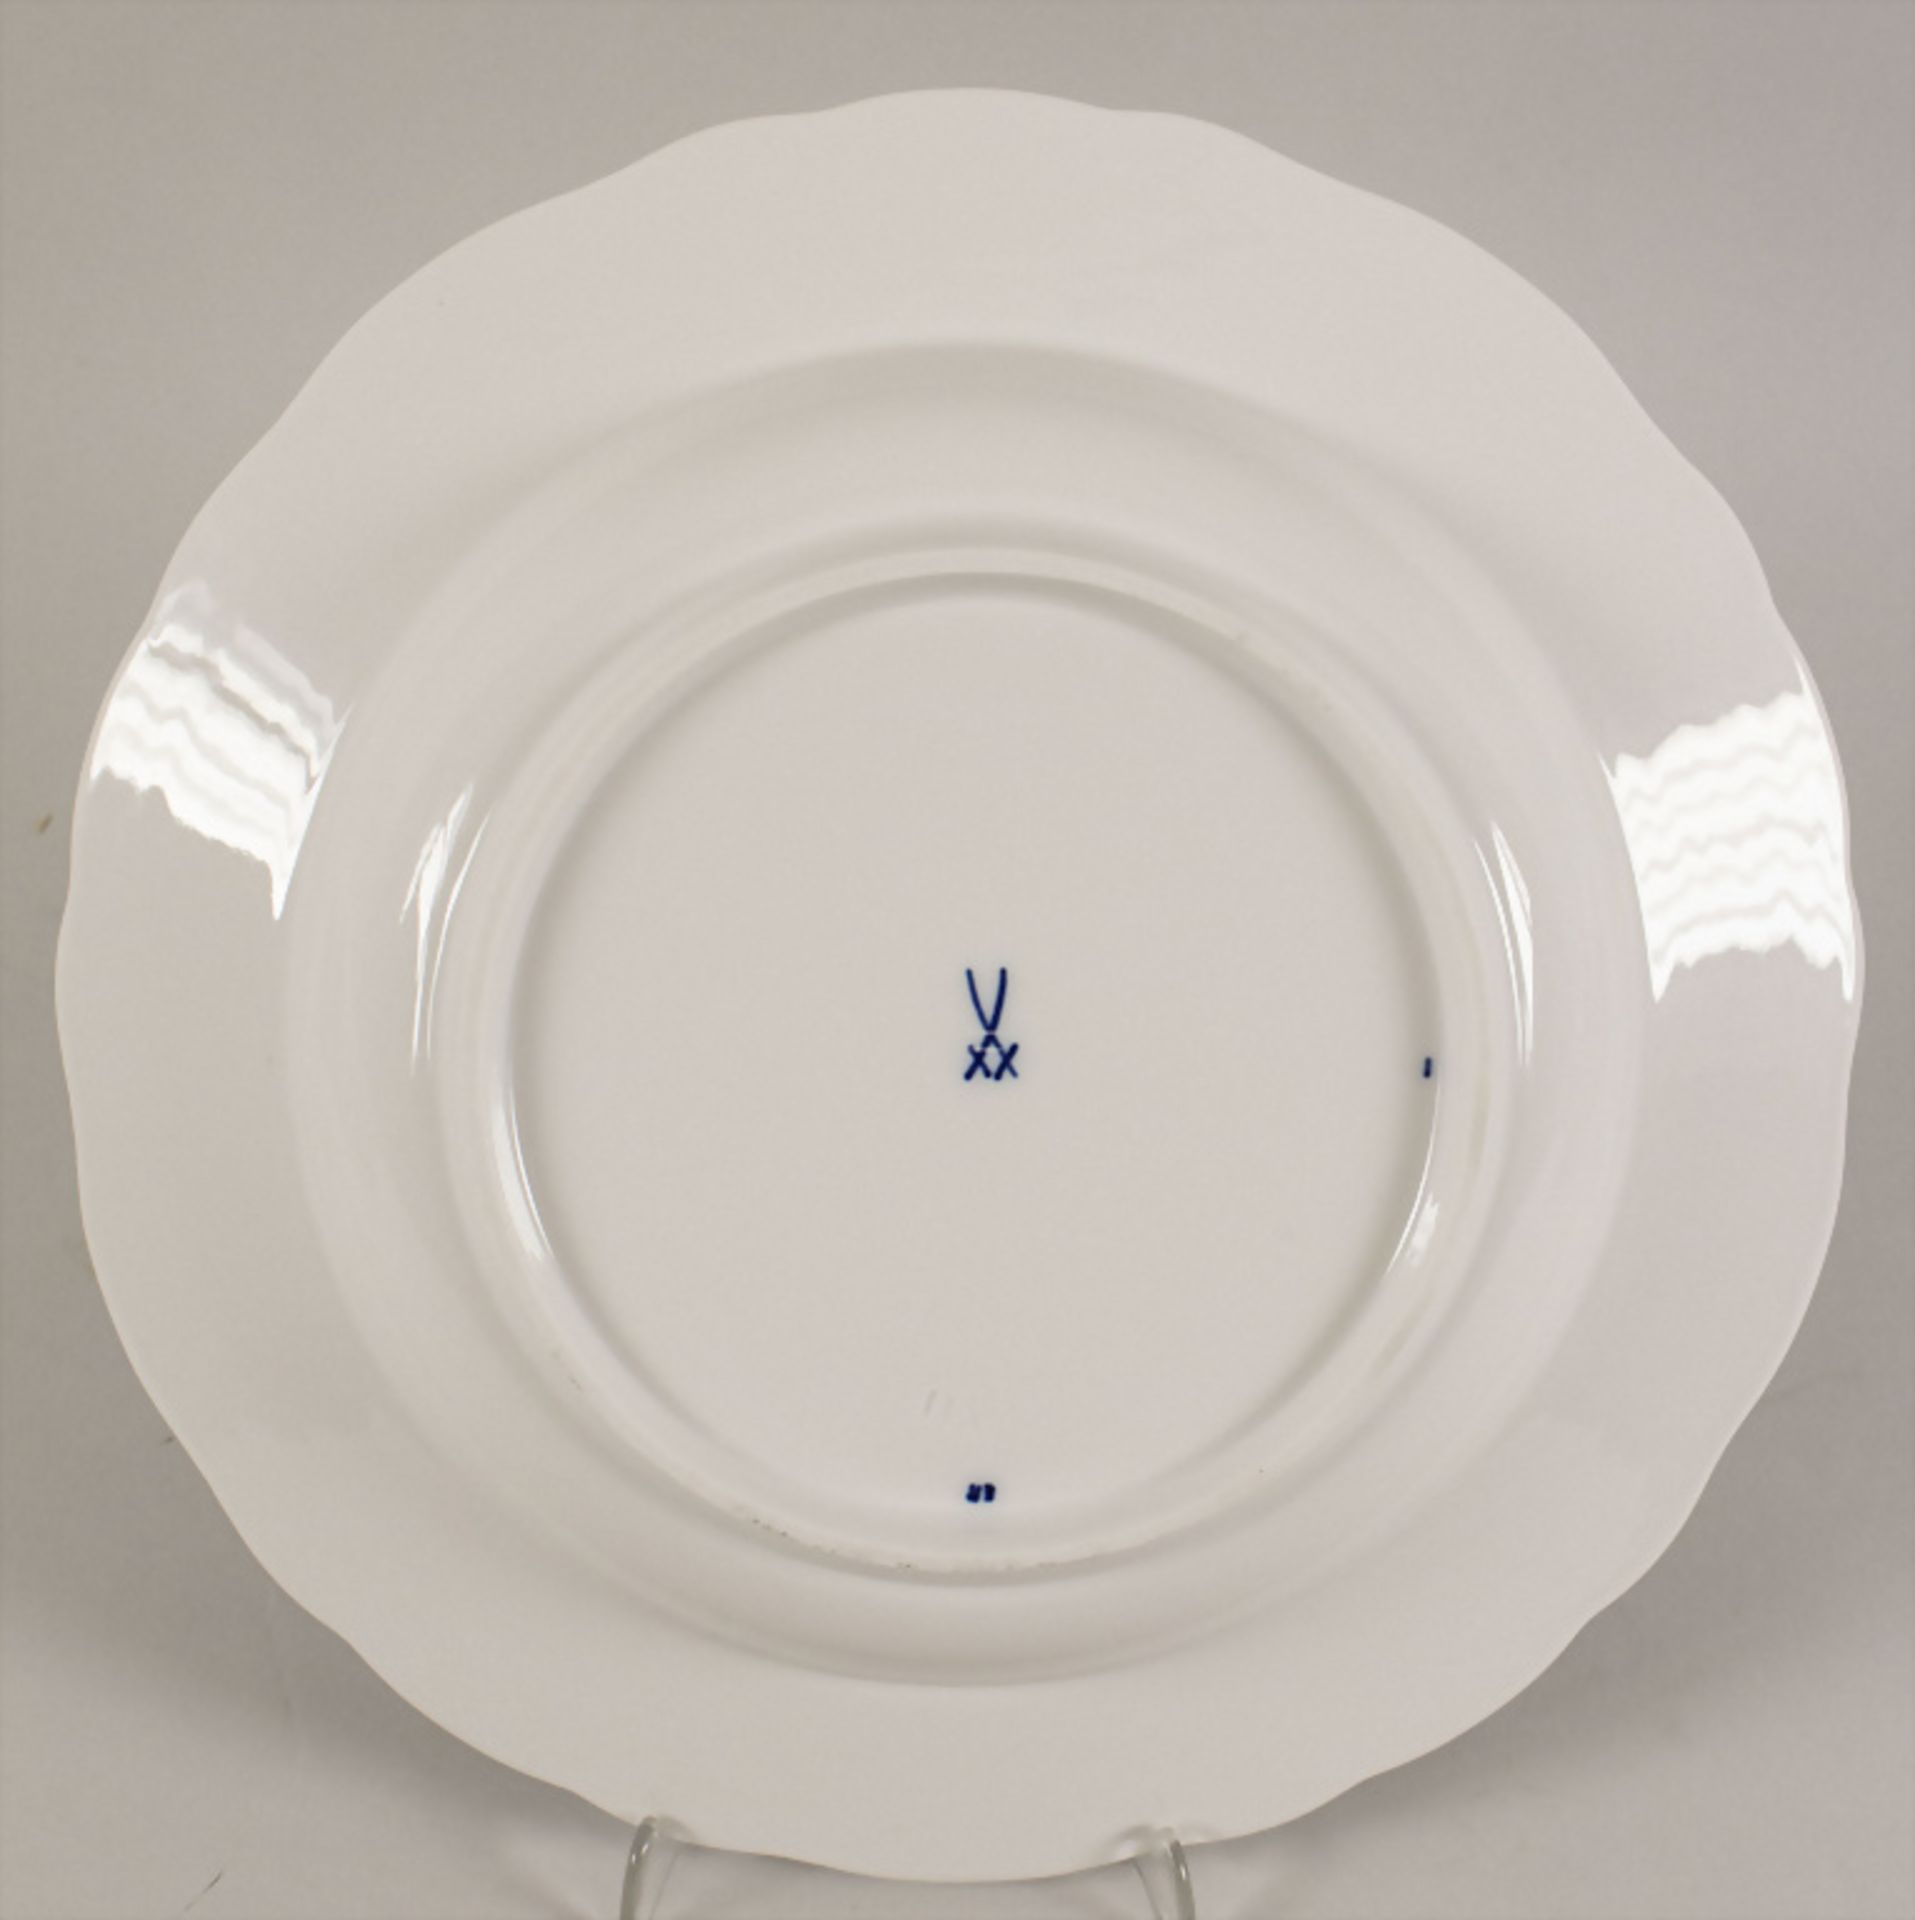 5 Speiseteller und 5 Suppenteller Zwiebelmuster / 5 dinner plates and 5 soup plates with onion ... - Image 4 of 4